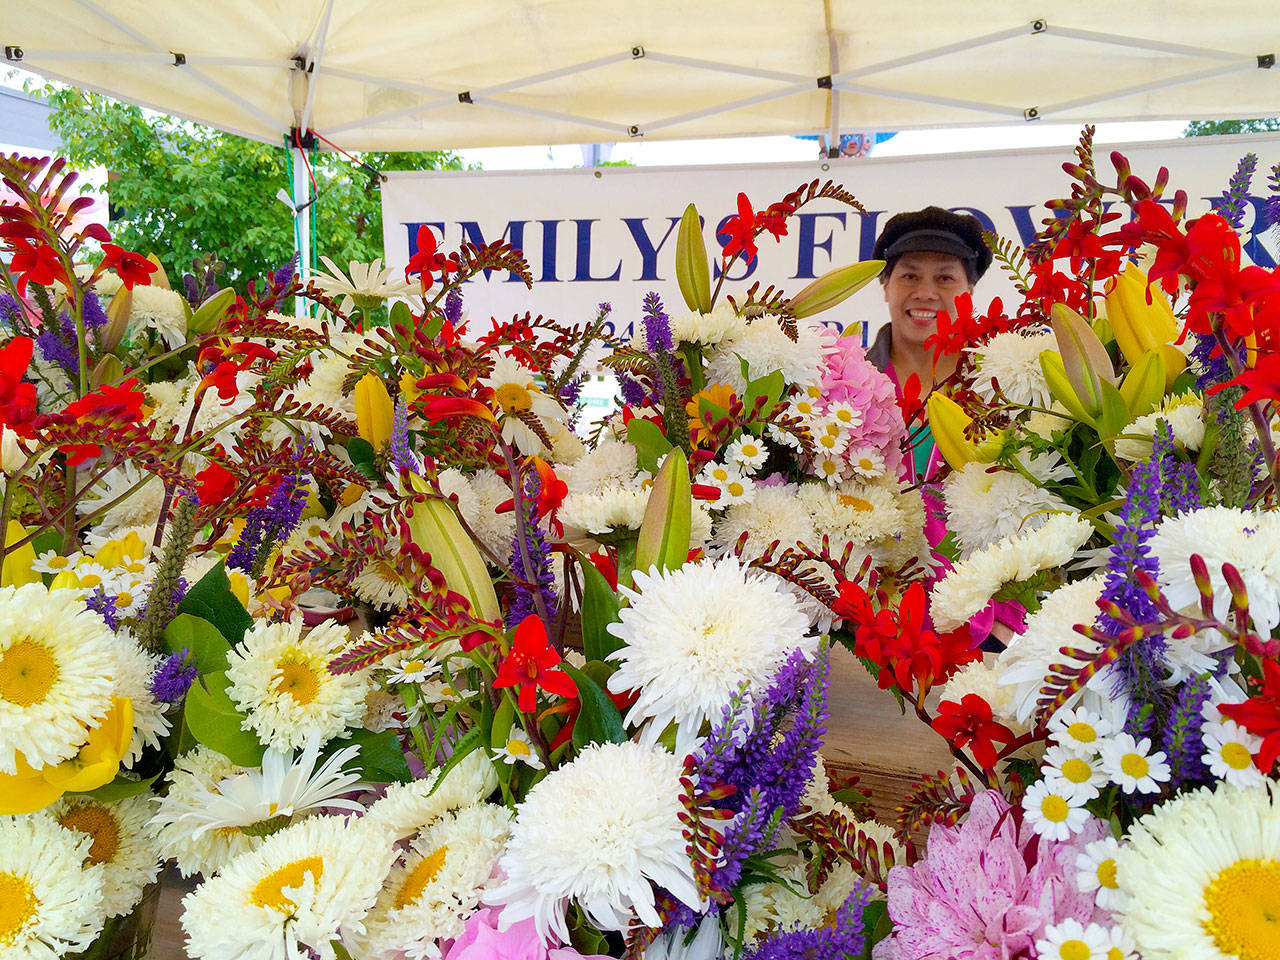 Check out Emily’s Flowers bouquets at the Sequim Farmers Market. Photo courtesy of April Hammerand/Sequim Farmers Market